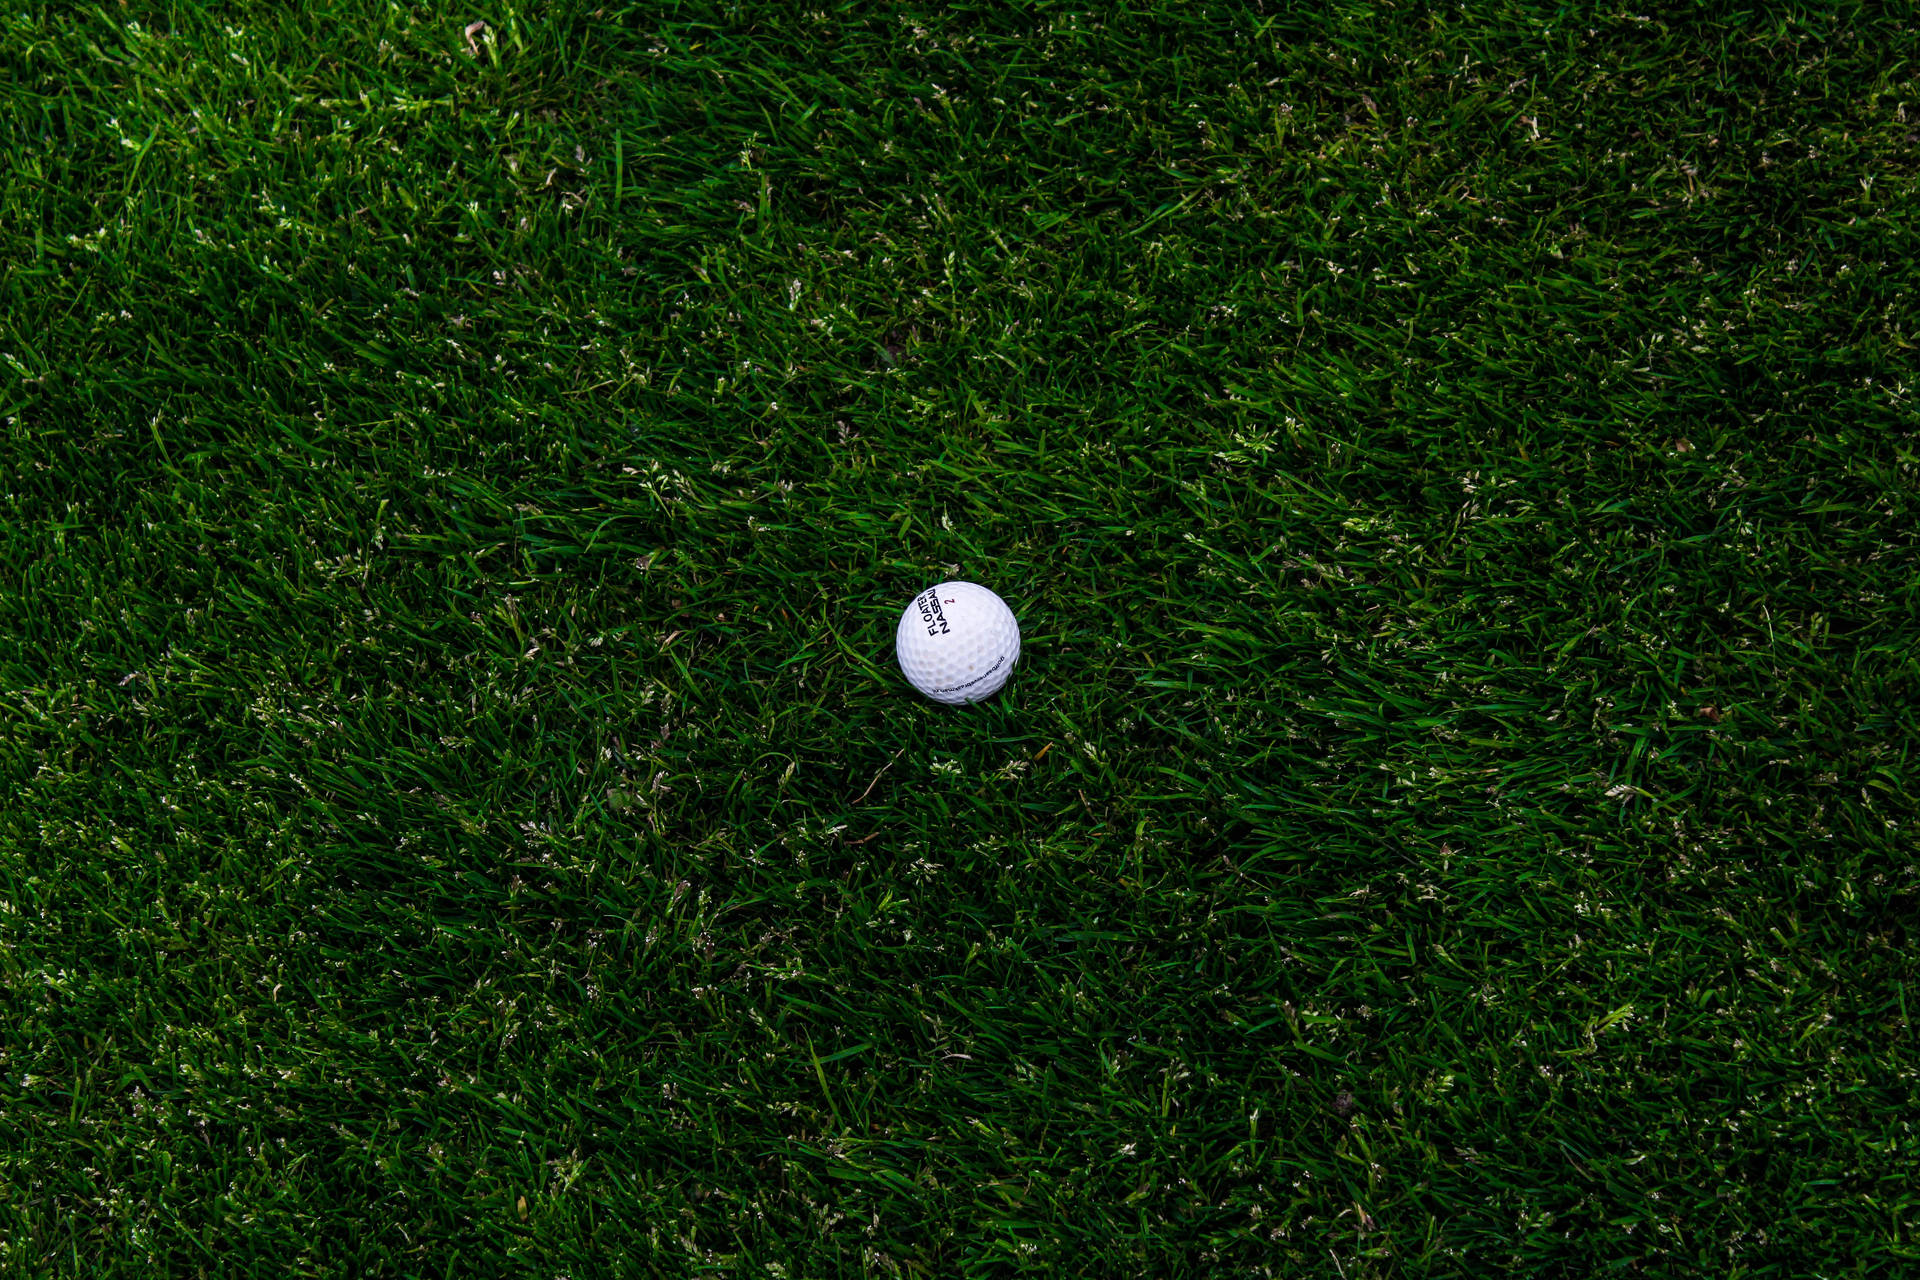 Golf 5184X3456 Wallpaper and Background Image